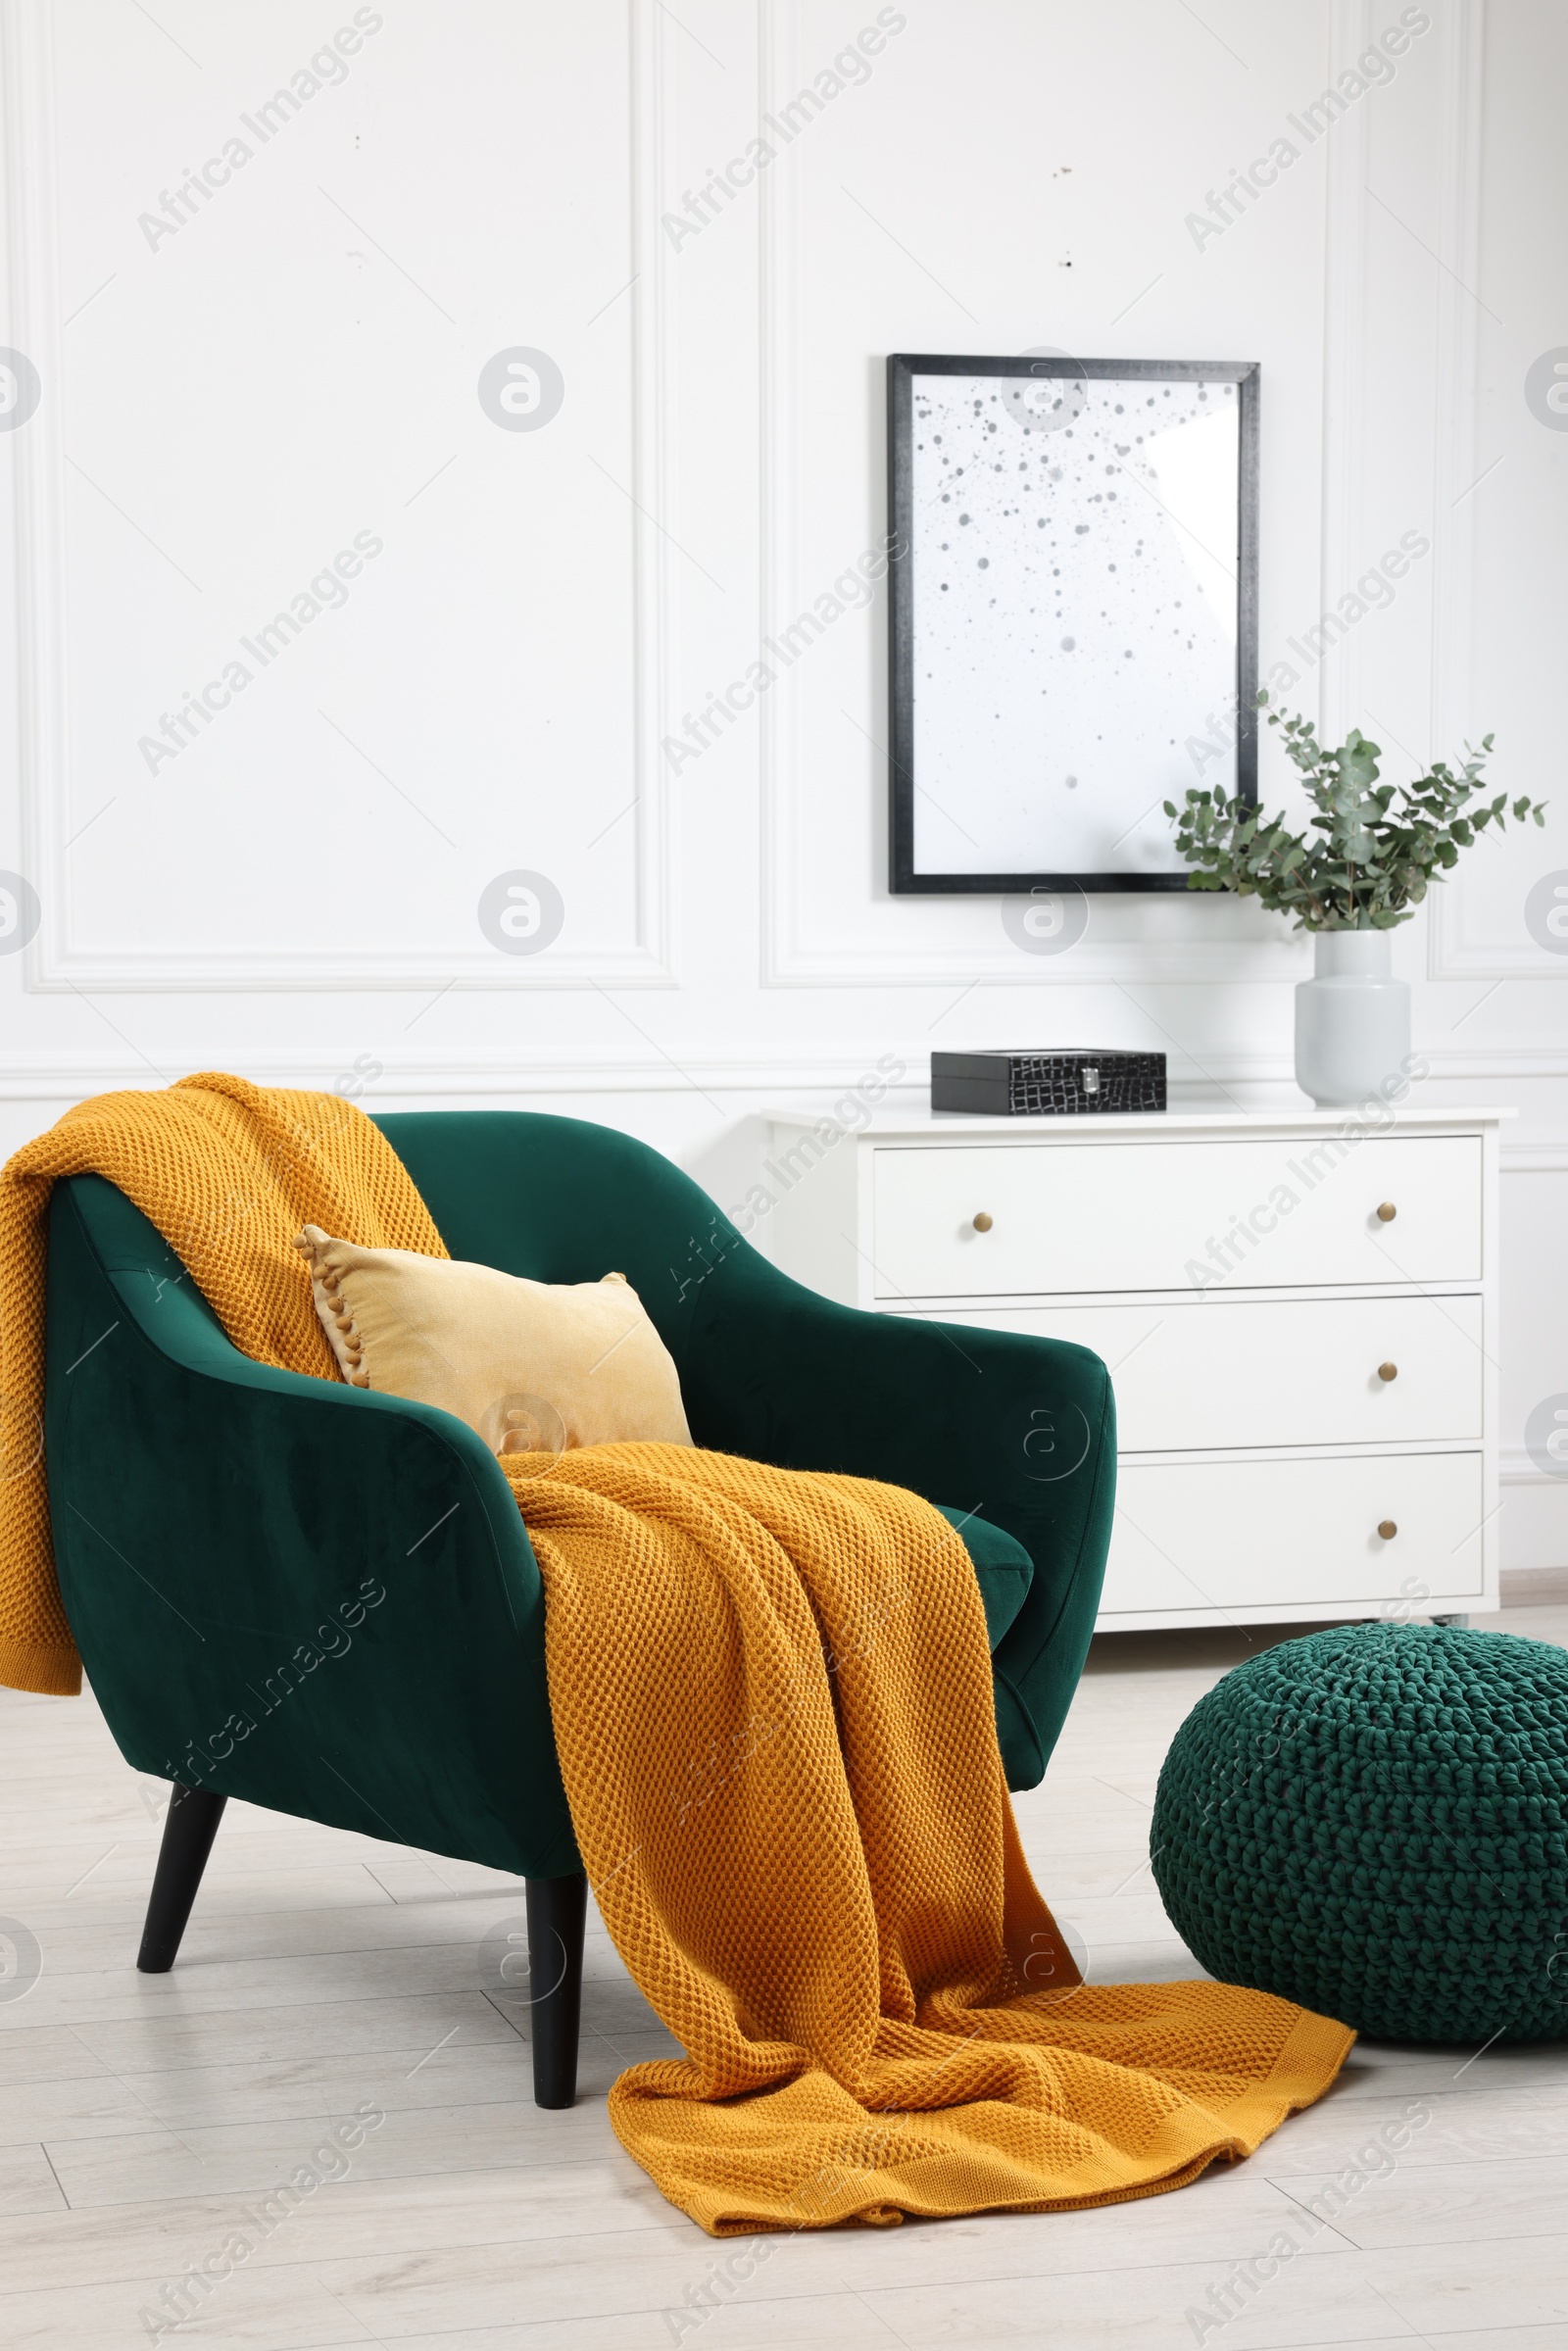 Photo of Comfortable armchair with blanket, ottoman and chest of drawers in room